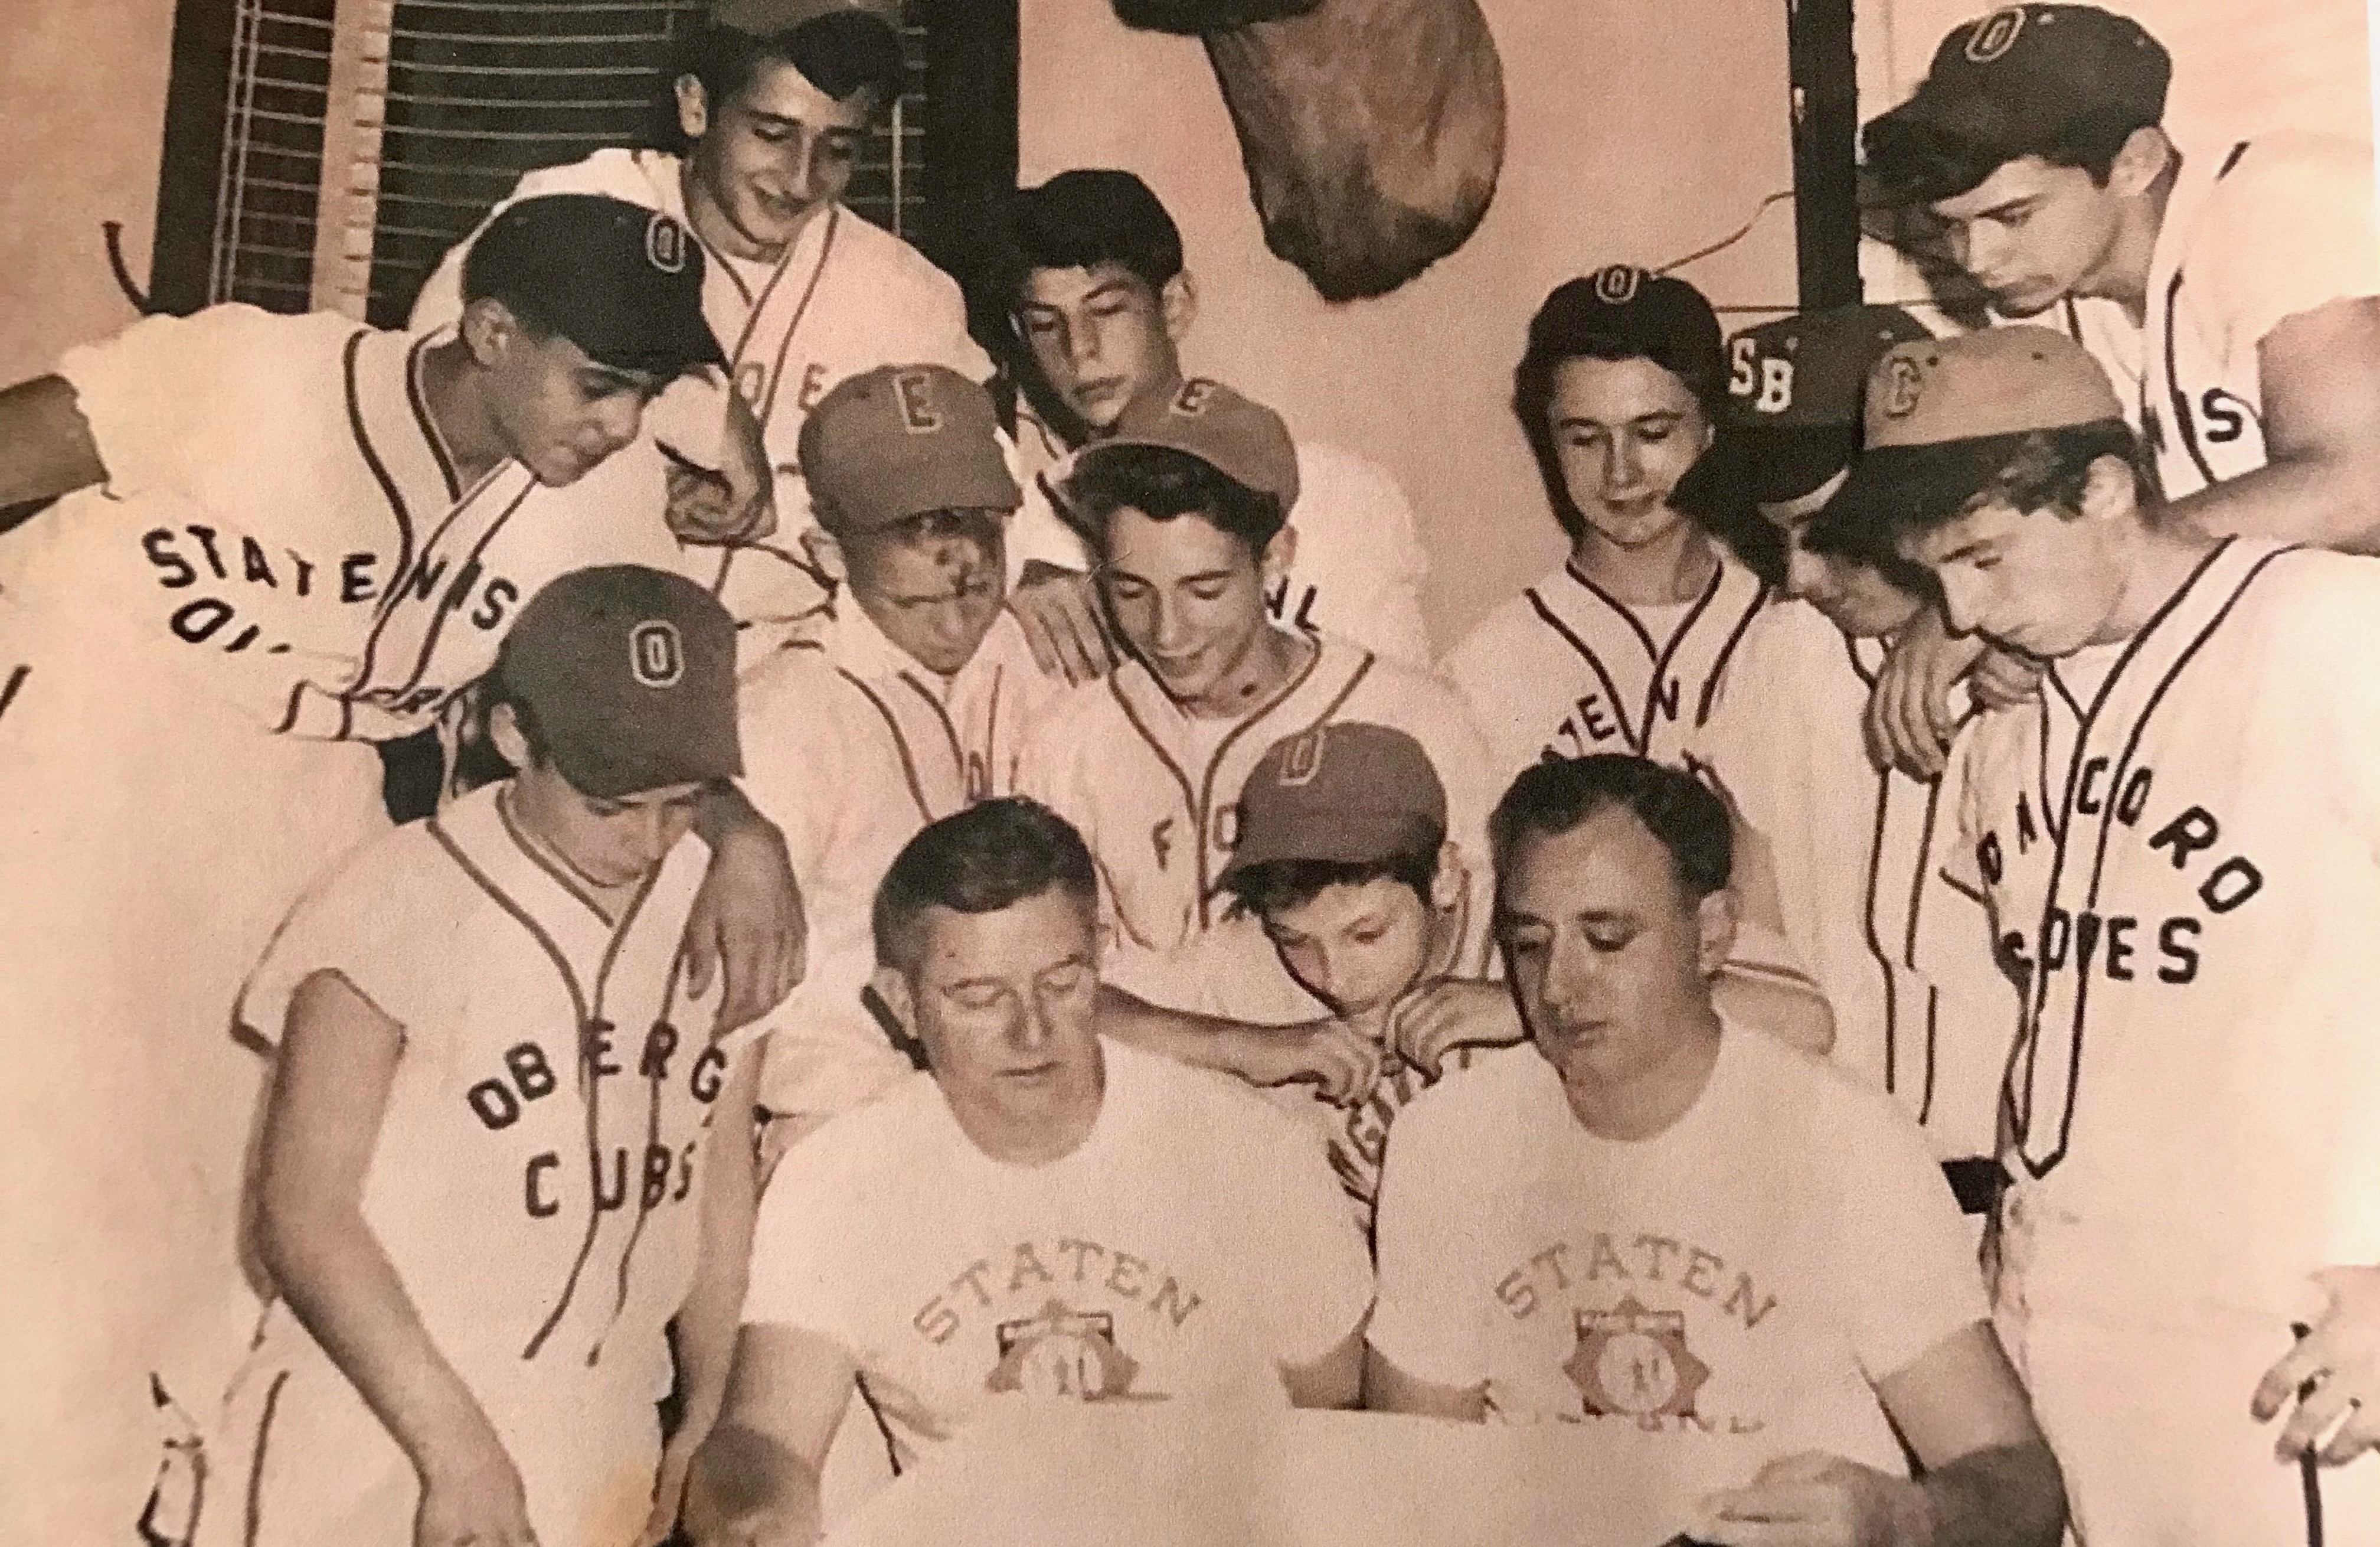 A Look Back: This is how Babe Ruth League baseball found a home on